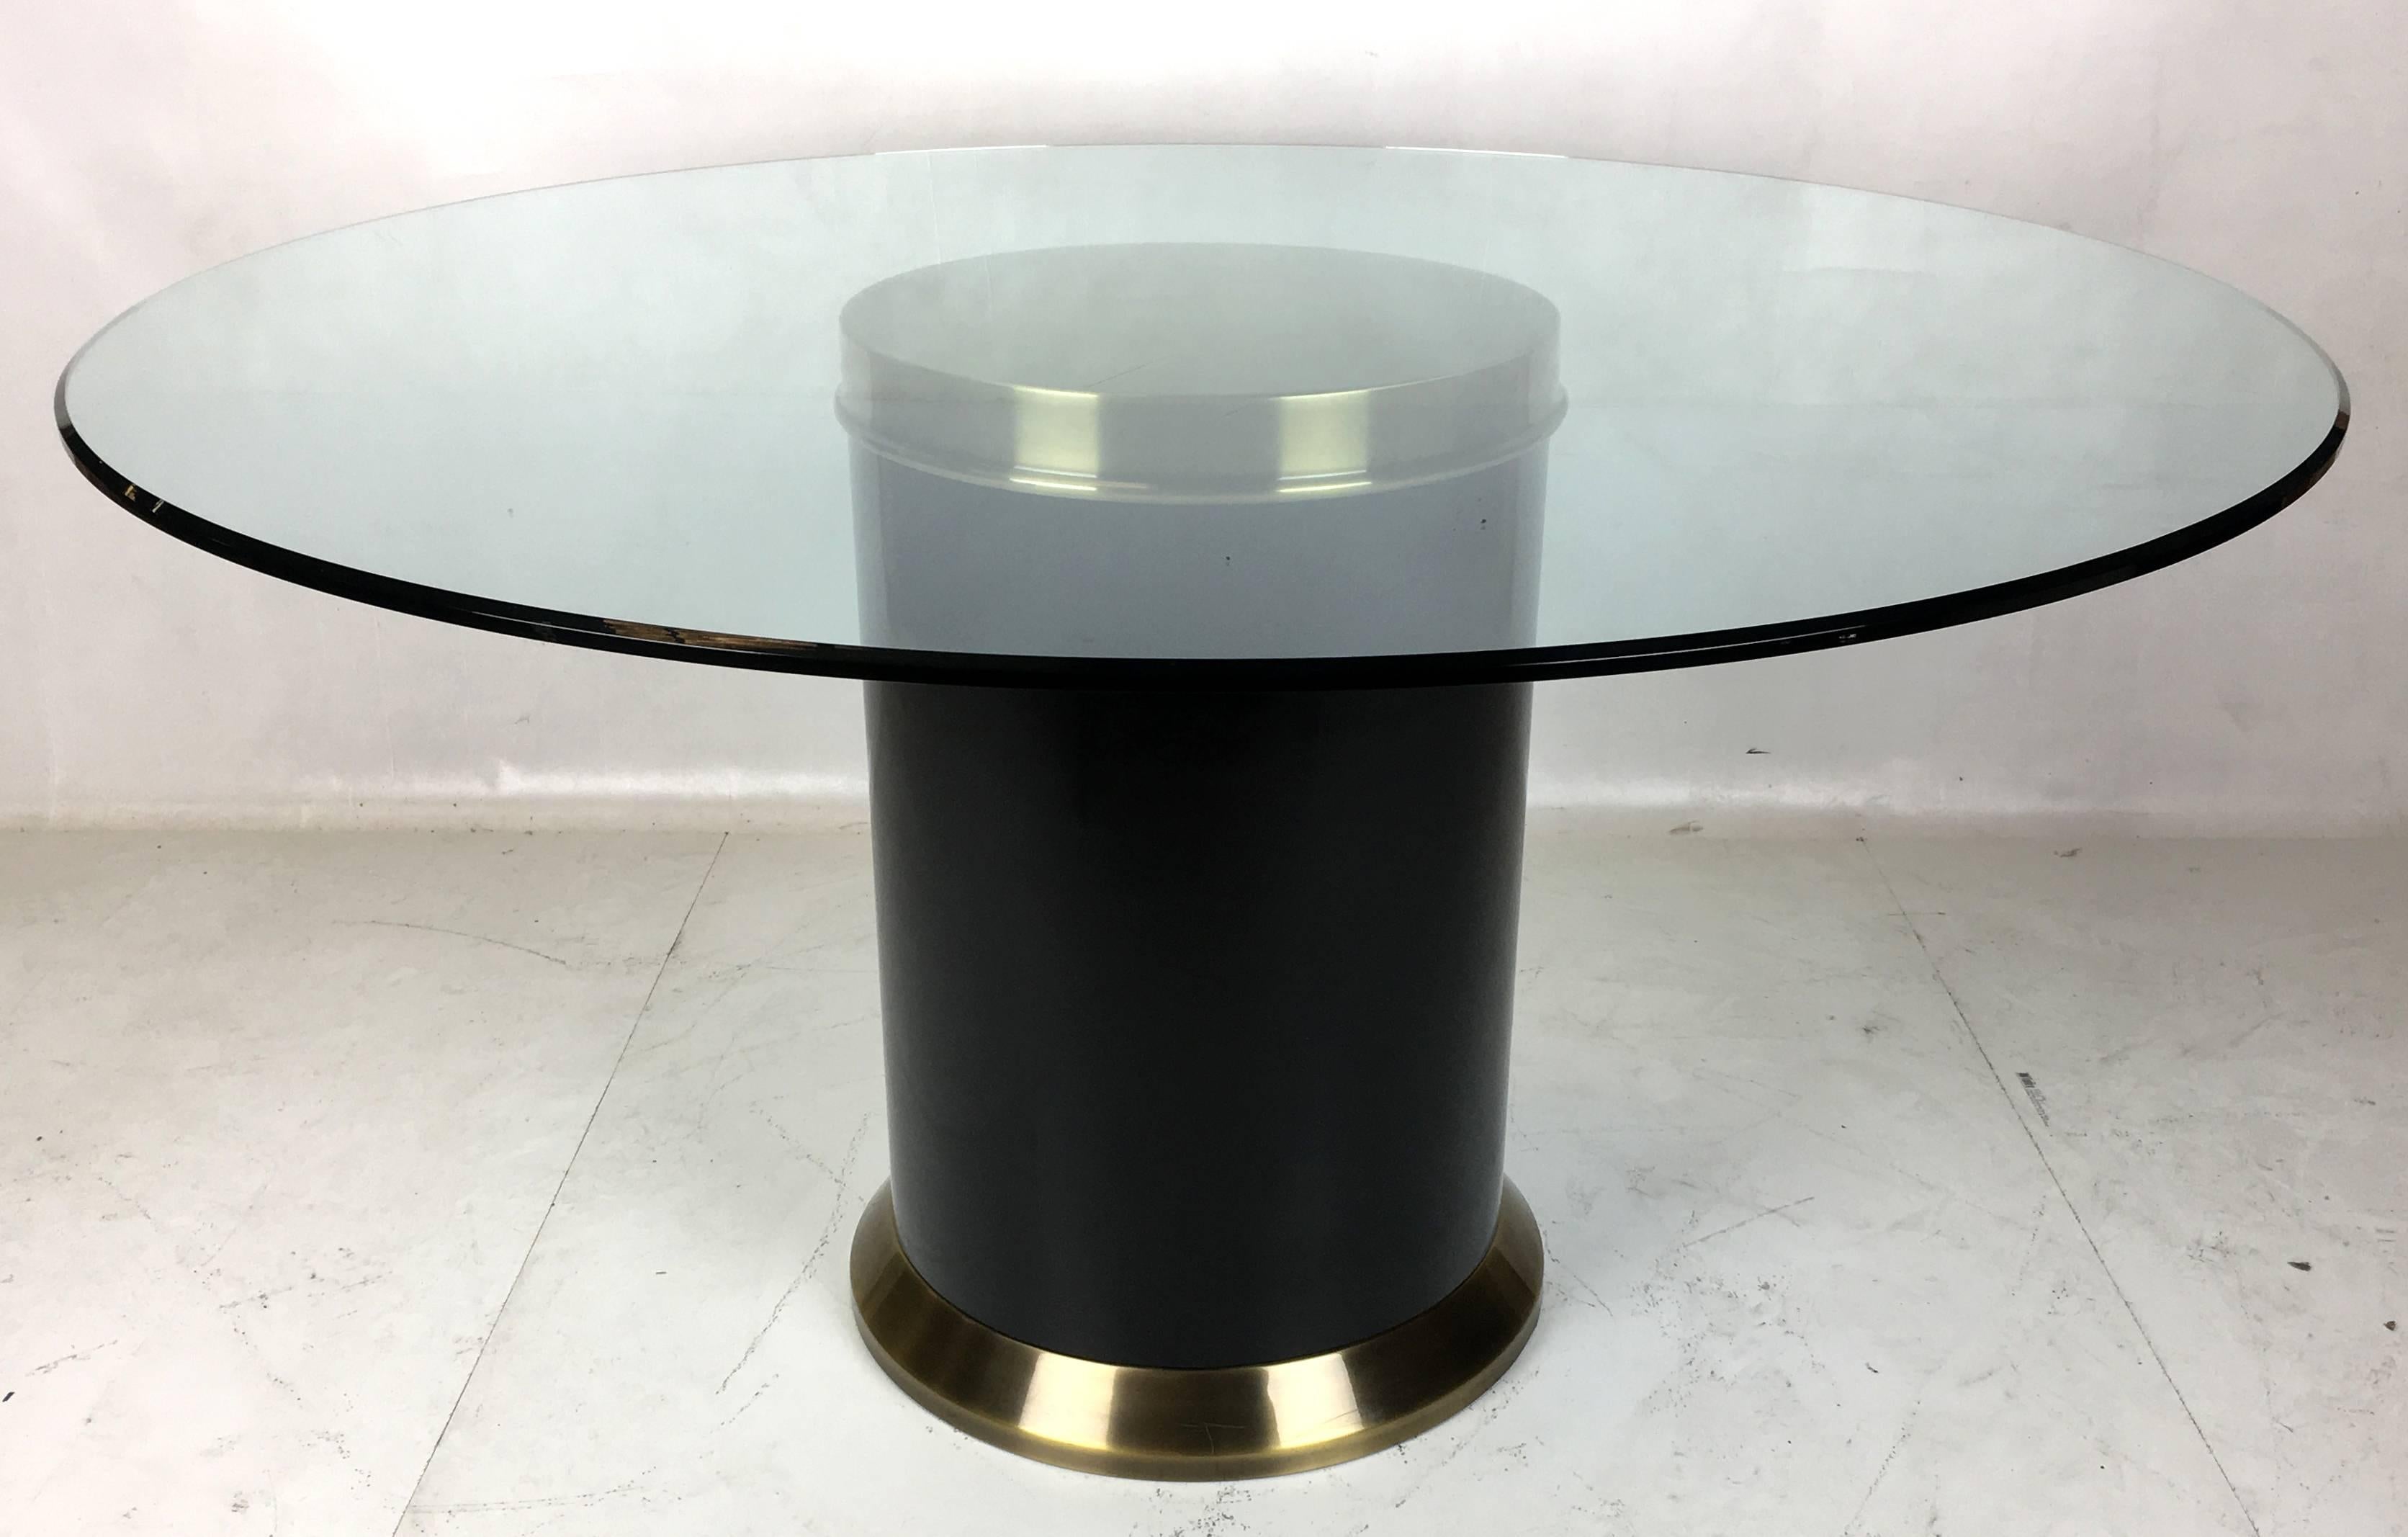 Elegant brass and black enamel dining table by Mastercraft. The beautiful brass paired with the black steel support makes an elegant, almost formal Modern statement holding a 3/4 thick polished glass top with a small chamfered top edge.

Base